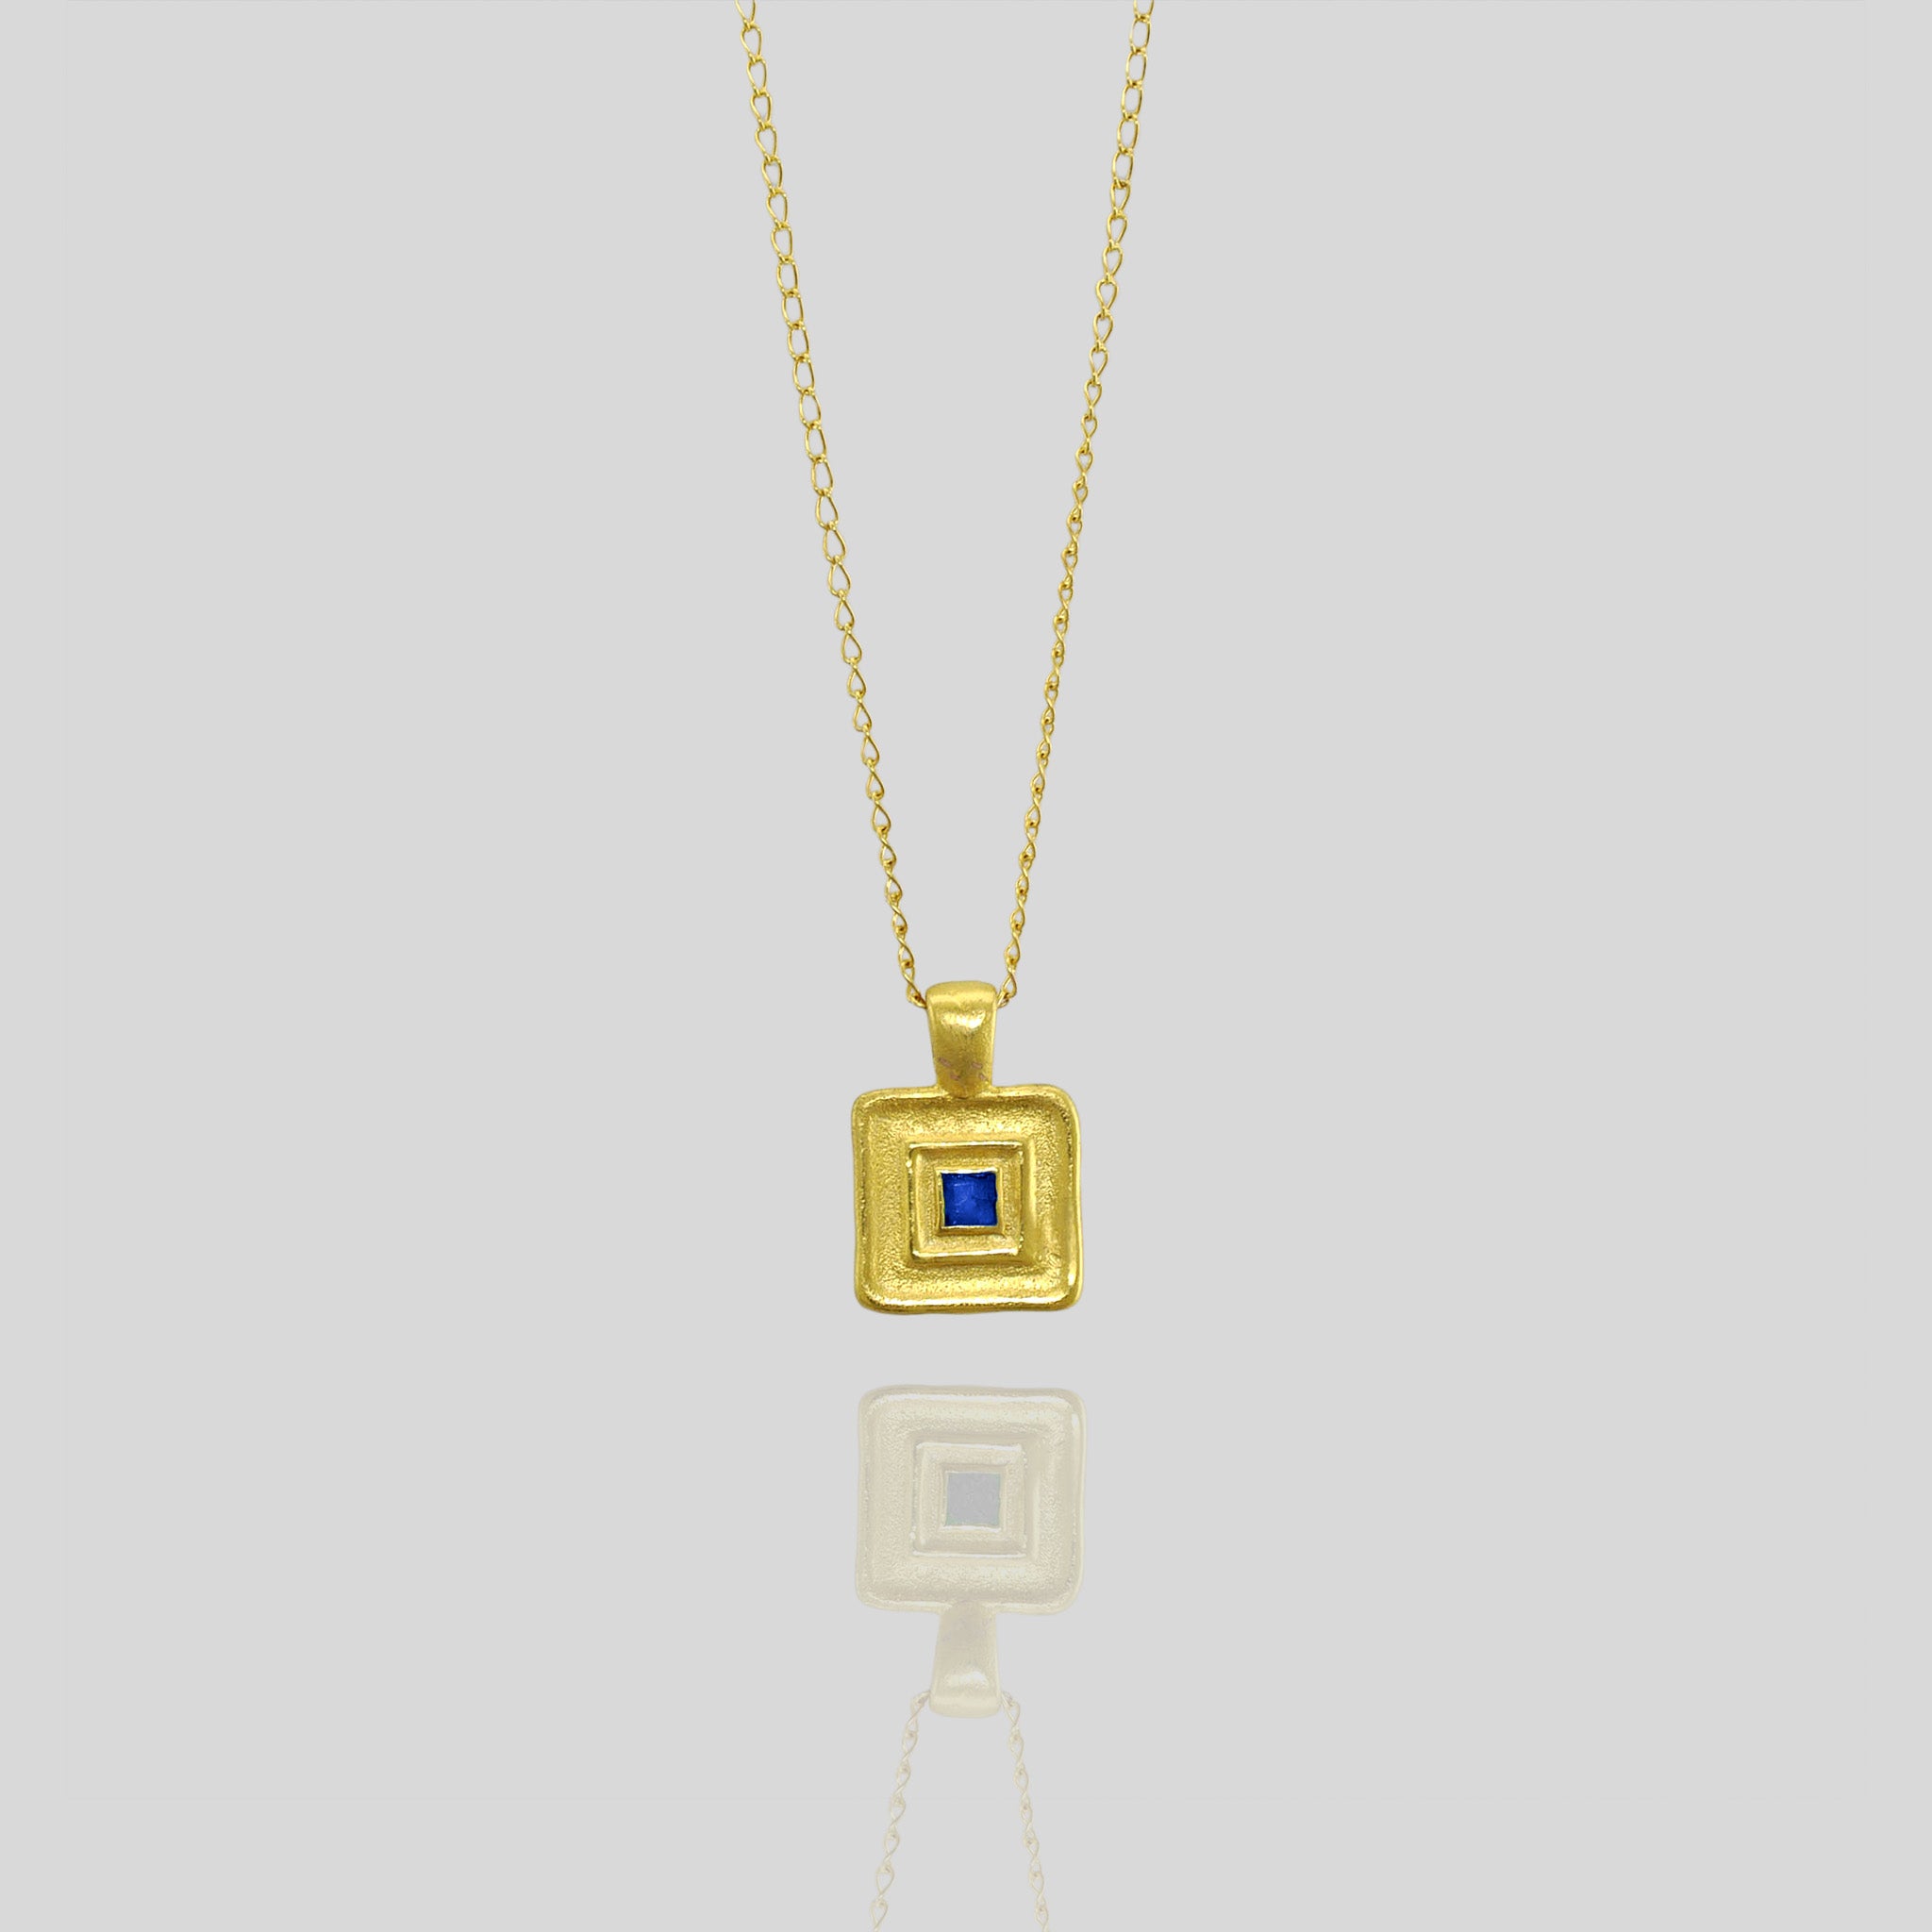 Pharaohs II - Handmade square gold pendant featuring a striking square Sapphire gemstone at its heart, crafted from Yellow Gold to mirror the majestic jewelry of ancient Egyptian Pharaohs.